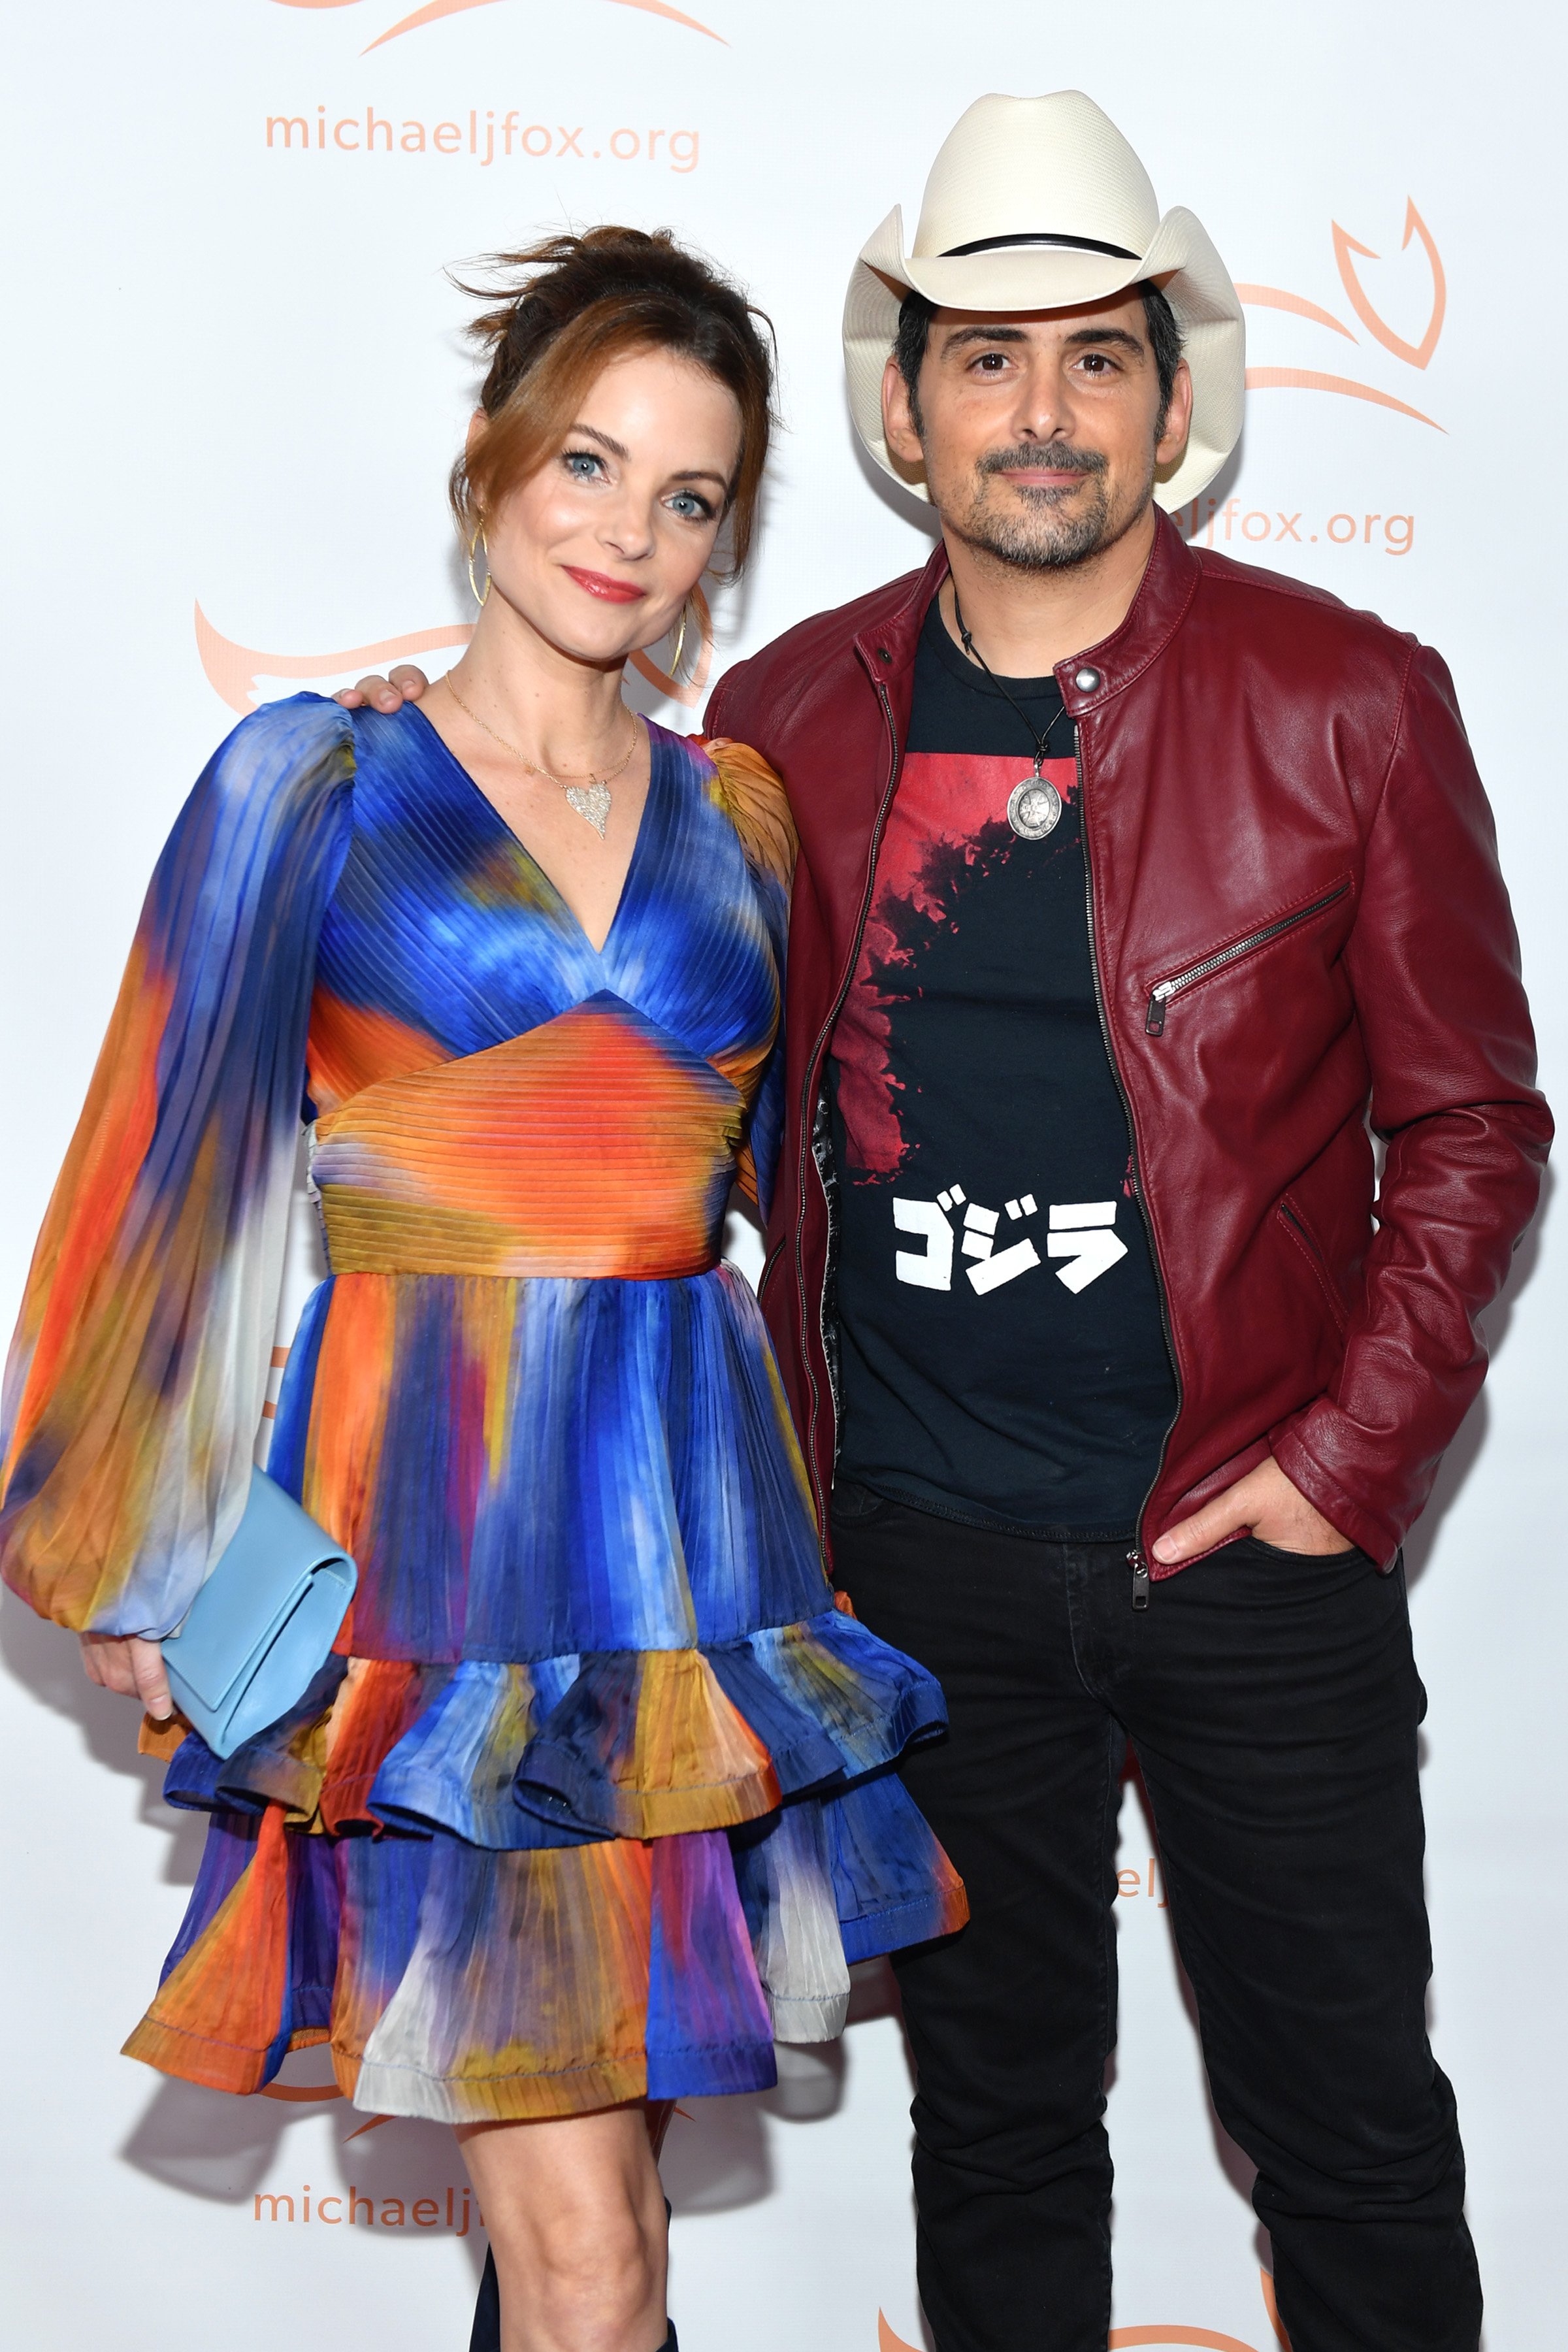 Kimberly Williams-Paisley and Brad Paisley attend the 2021 A Funny Thing Happened On The Way To Cure Parkinson's gala on October 23, 2021, in New York City. | Source: Getty Images